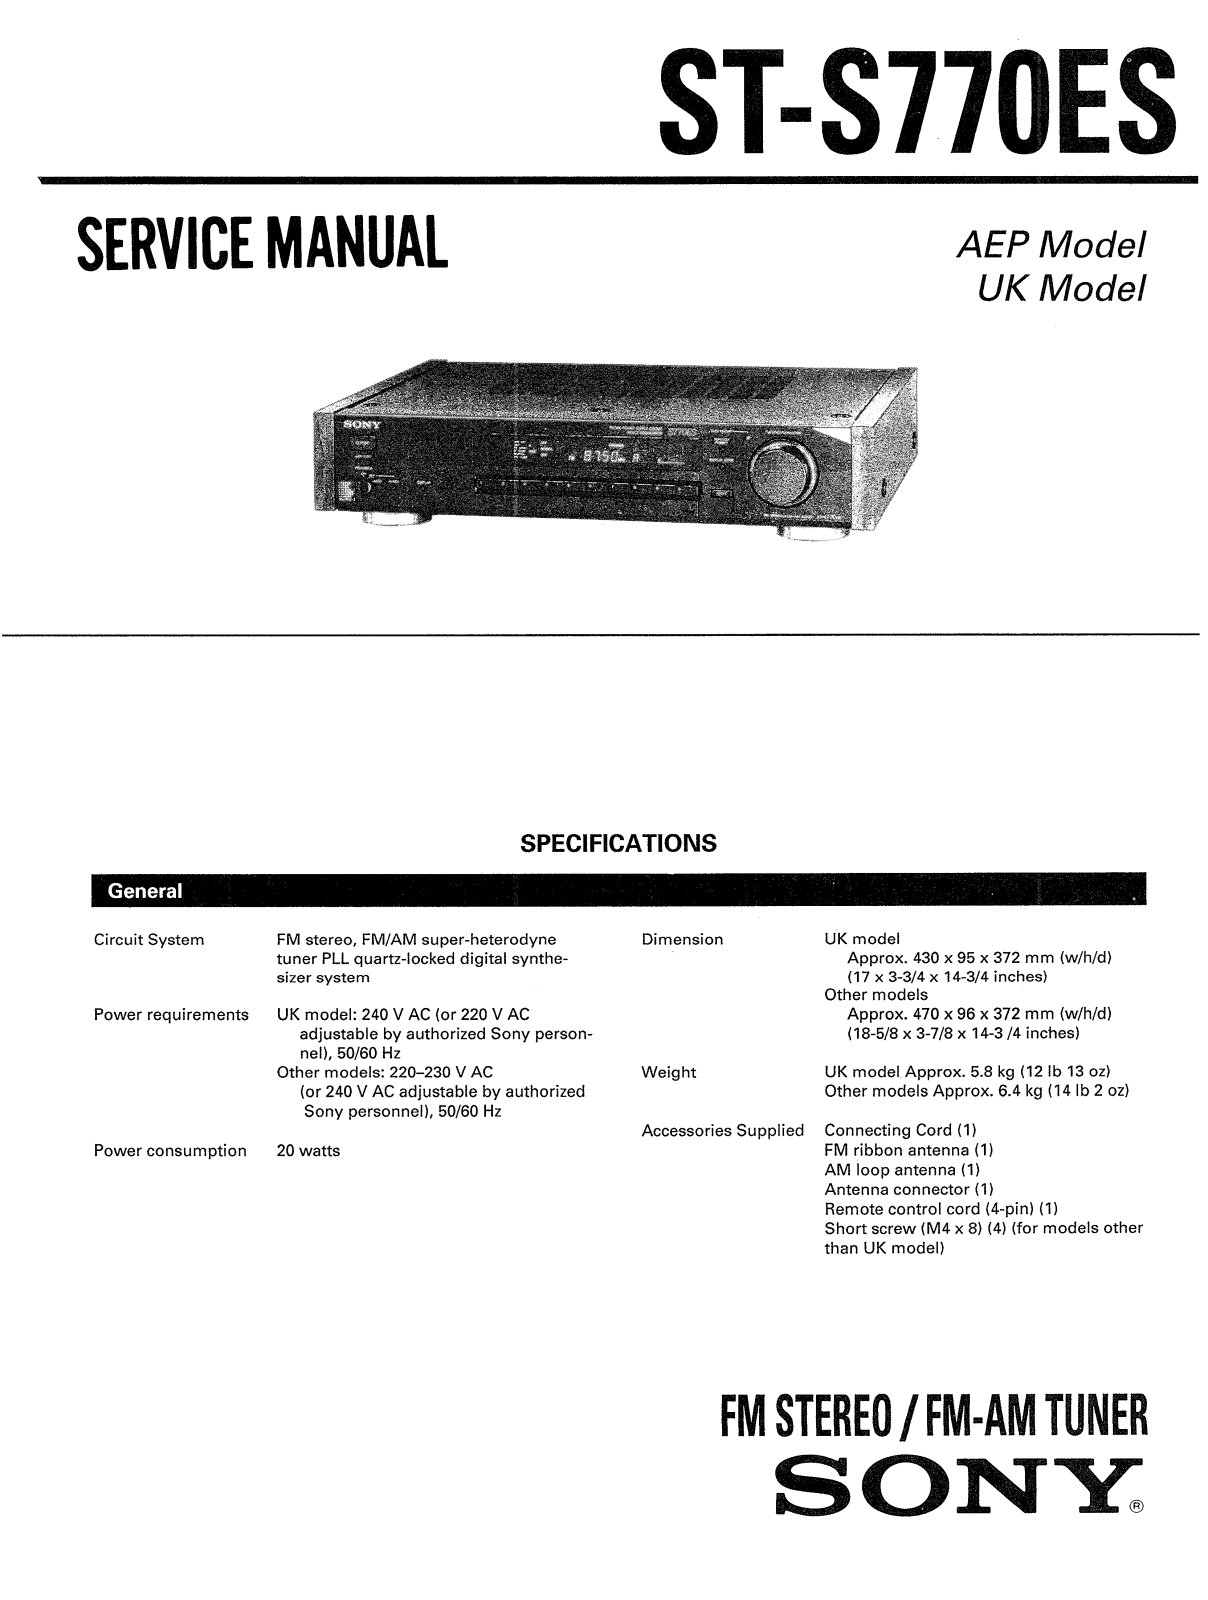 Sony STS-770-ES Service manual